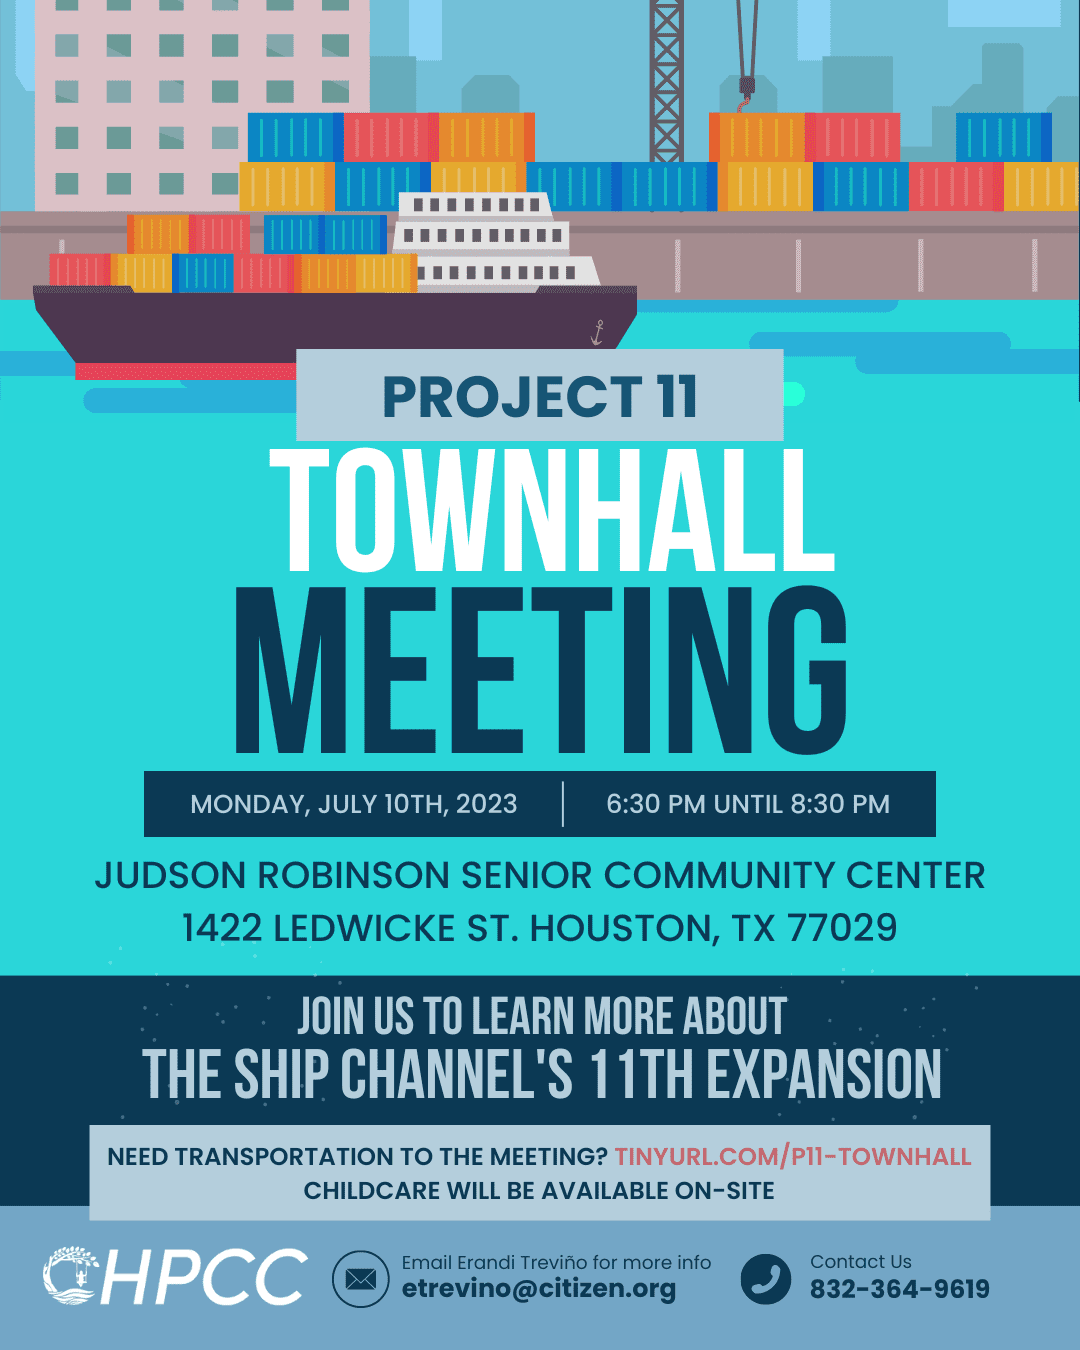 Plain Text: Project 11 Townhall meeting, Monday, July 10. 6:30 PM - 8:30 PM. Judson Robinson Senior Community Center 1422 Ledwicke St. Houston, TX 77029. Join us to learn more about the Ship Channel's 11th expansion. Need transportation to the meeting? tinyurl.com/P11-townhall. Childcare will be available on-site. Email Erandi Treviño at etrevino@citizen.org for more info. Contact us: 832.364.9619